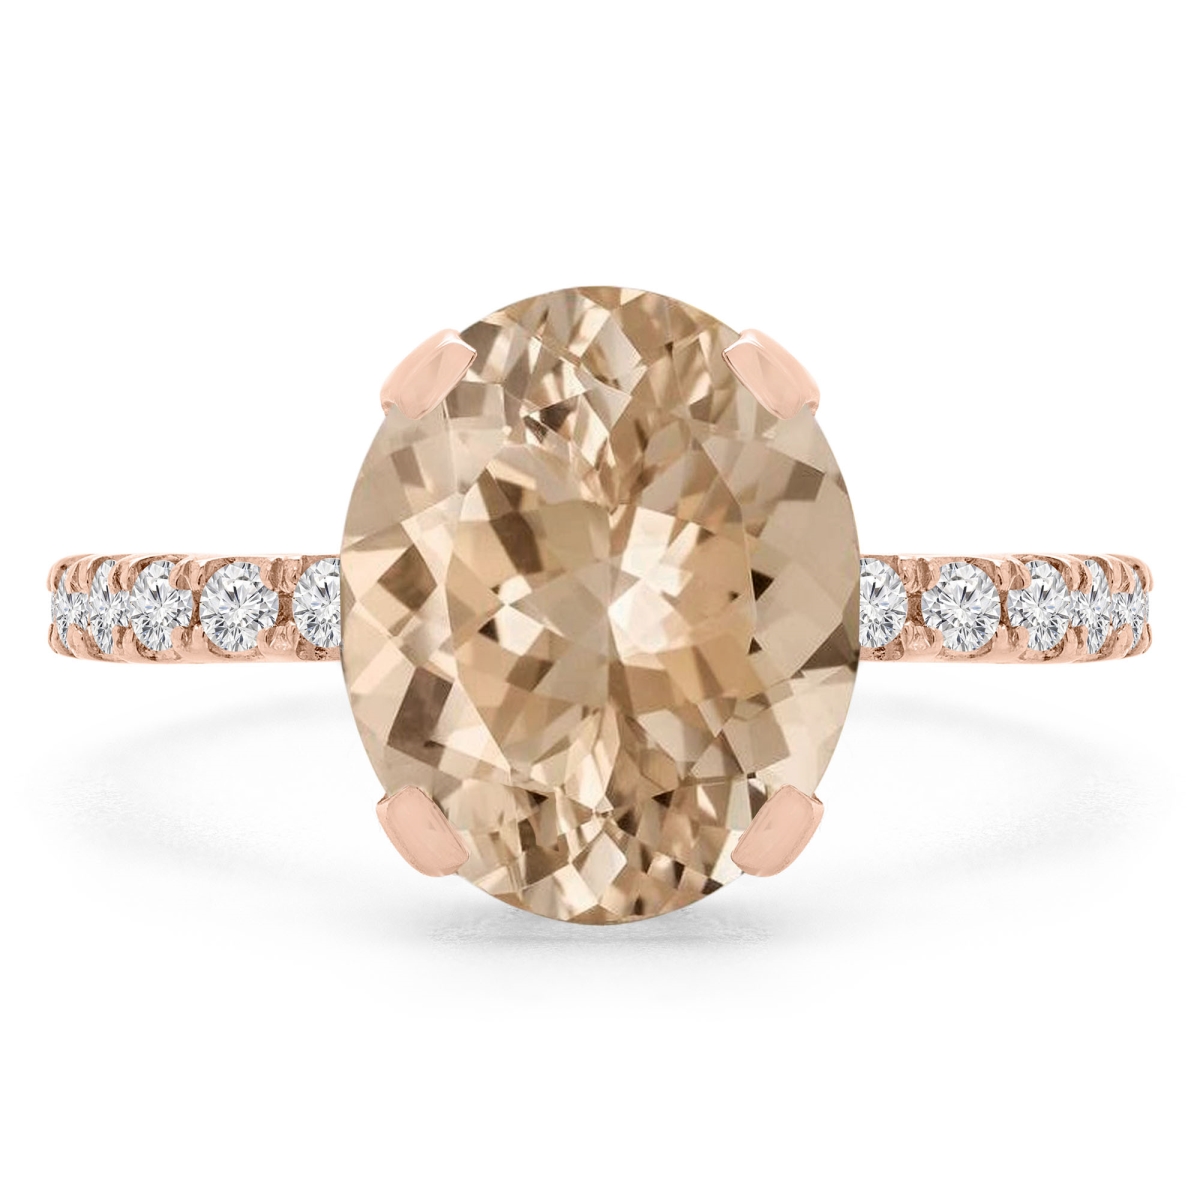 Picture of Majesty Diamonds MD190407-5 3.4 CTW Oval Pink Morganite Under Halo Engagement Ring in 14K Rose Gold - Size 5